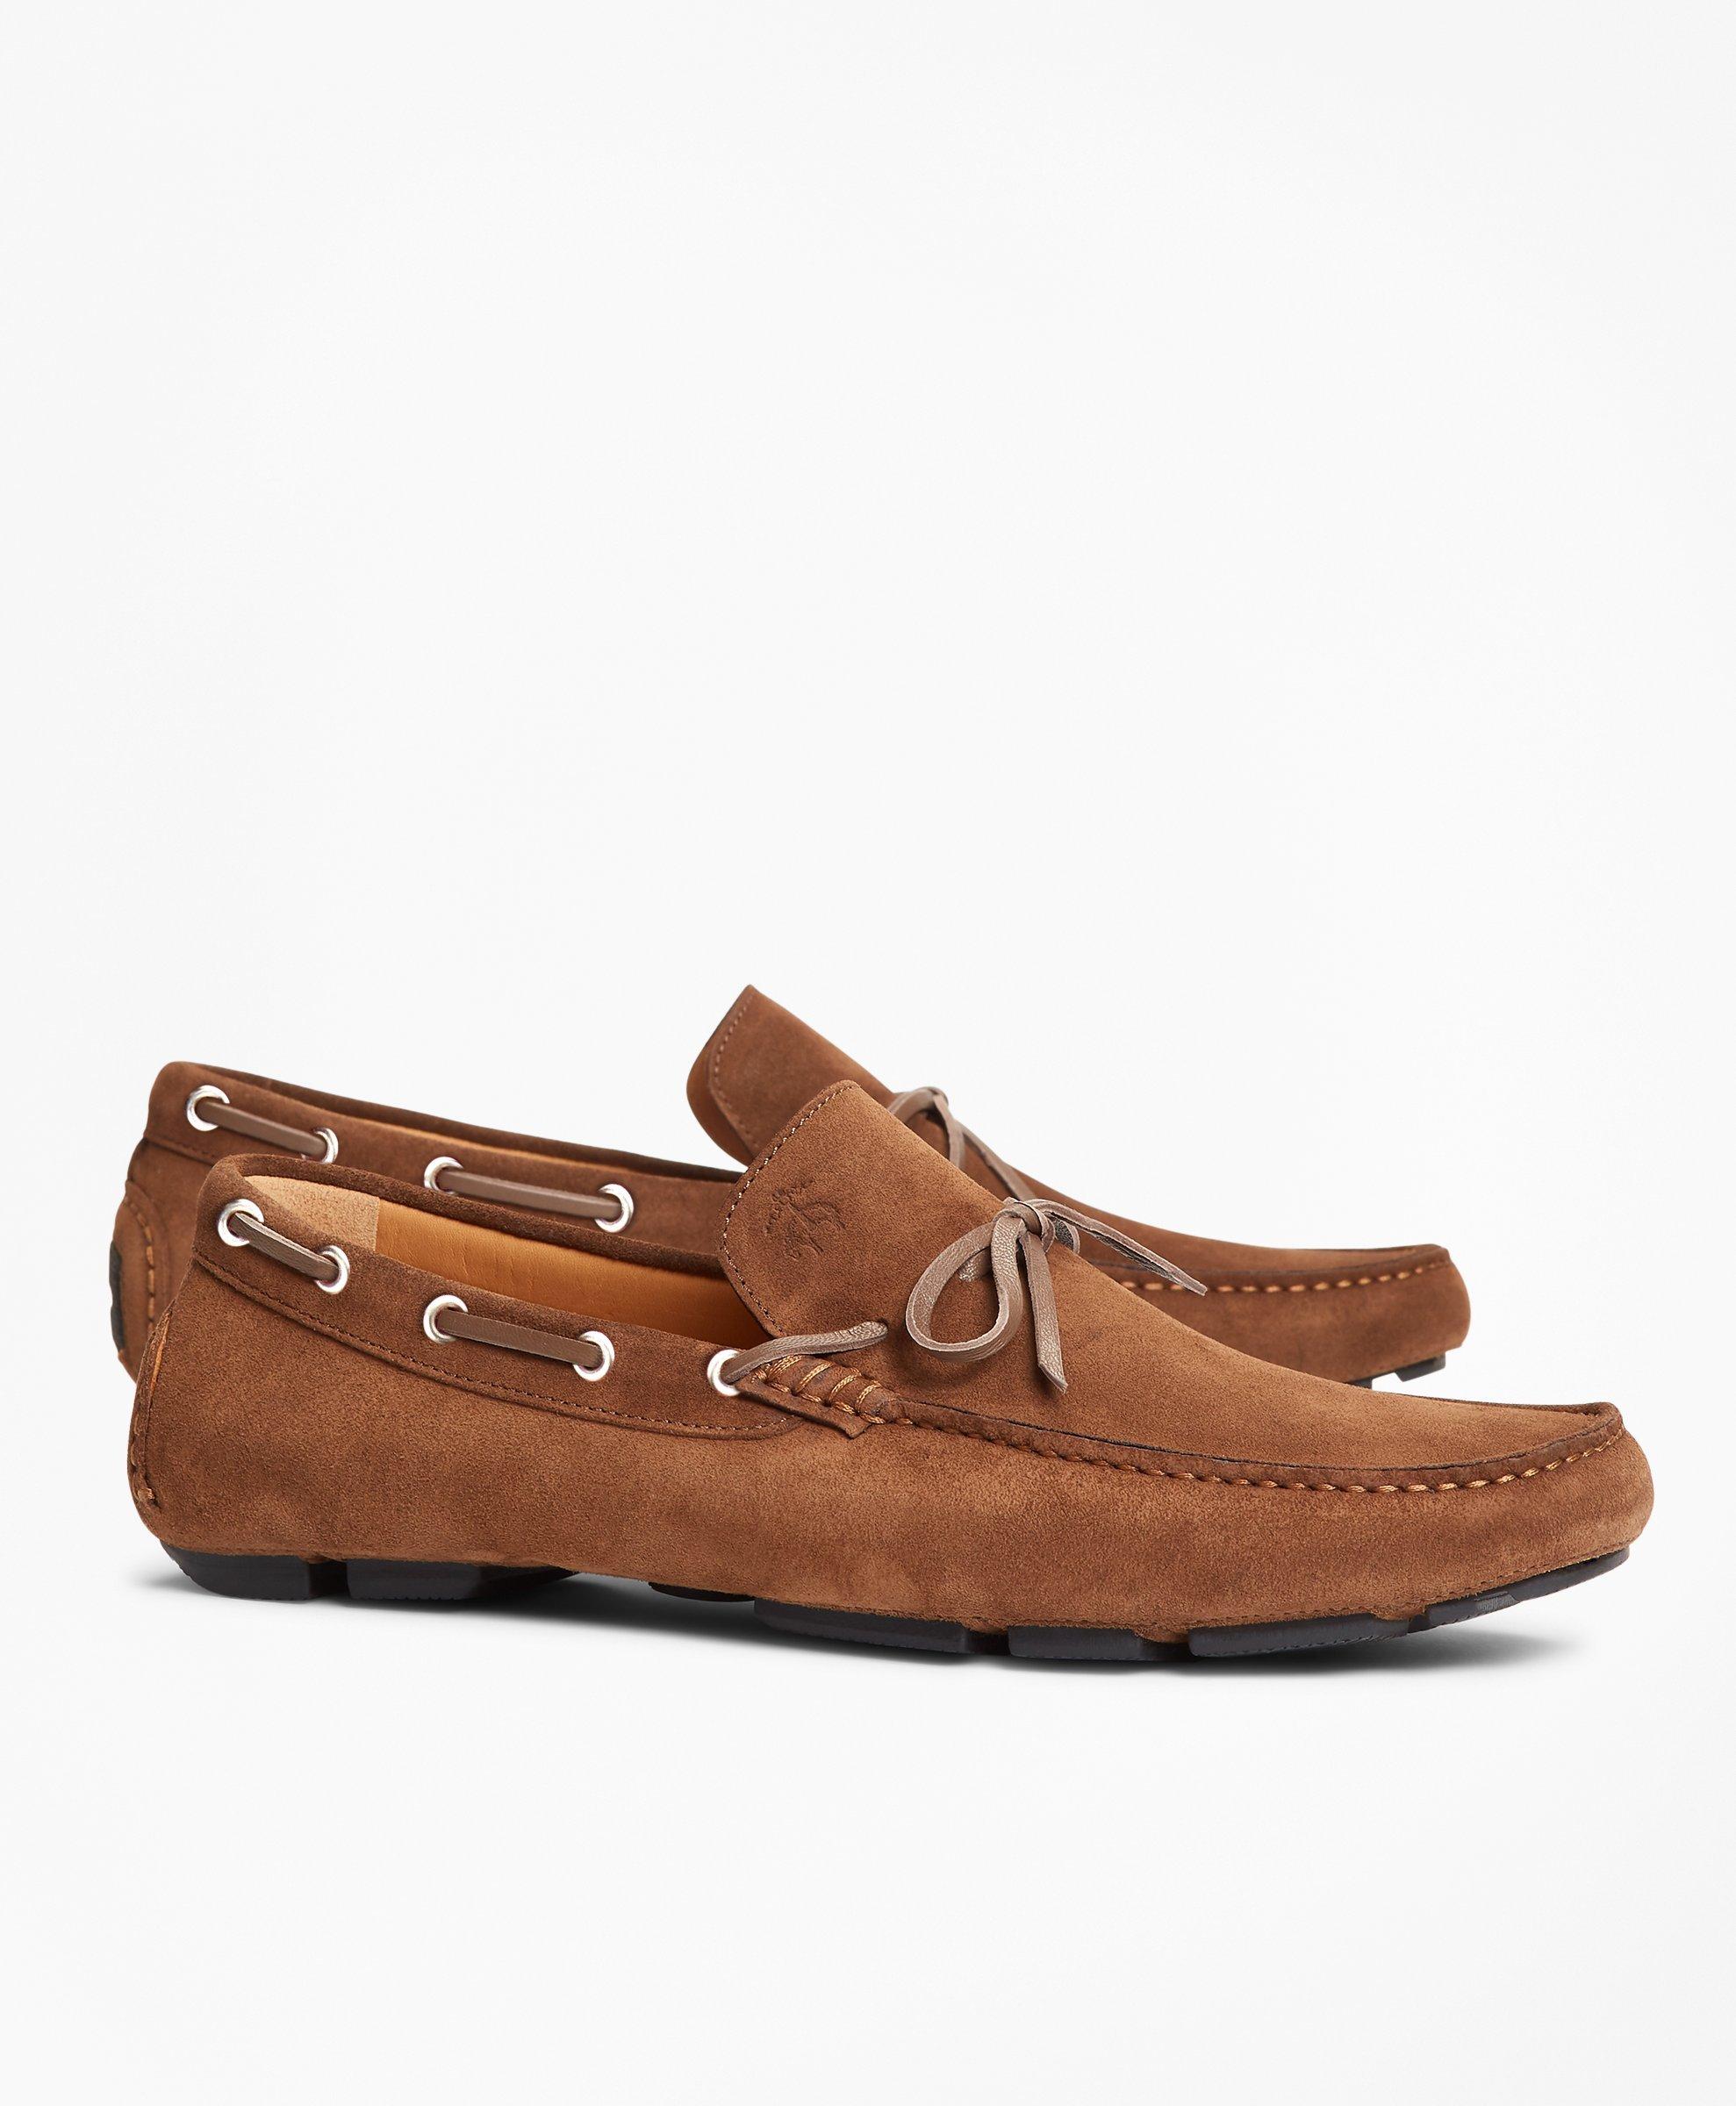 Suede Driving Moccasins